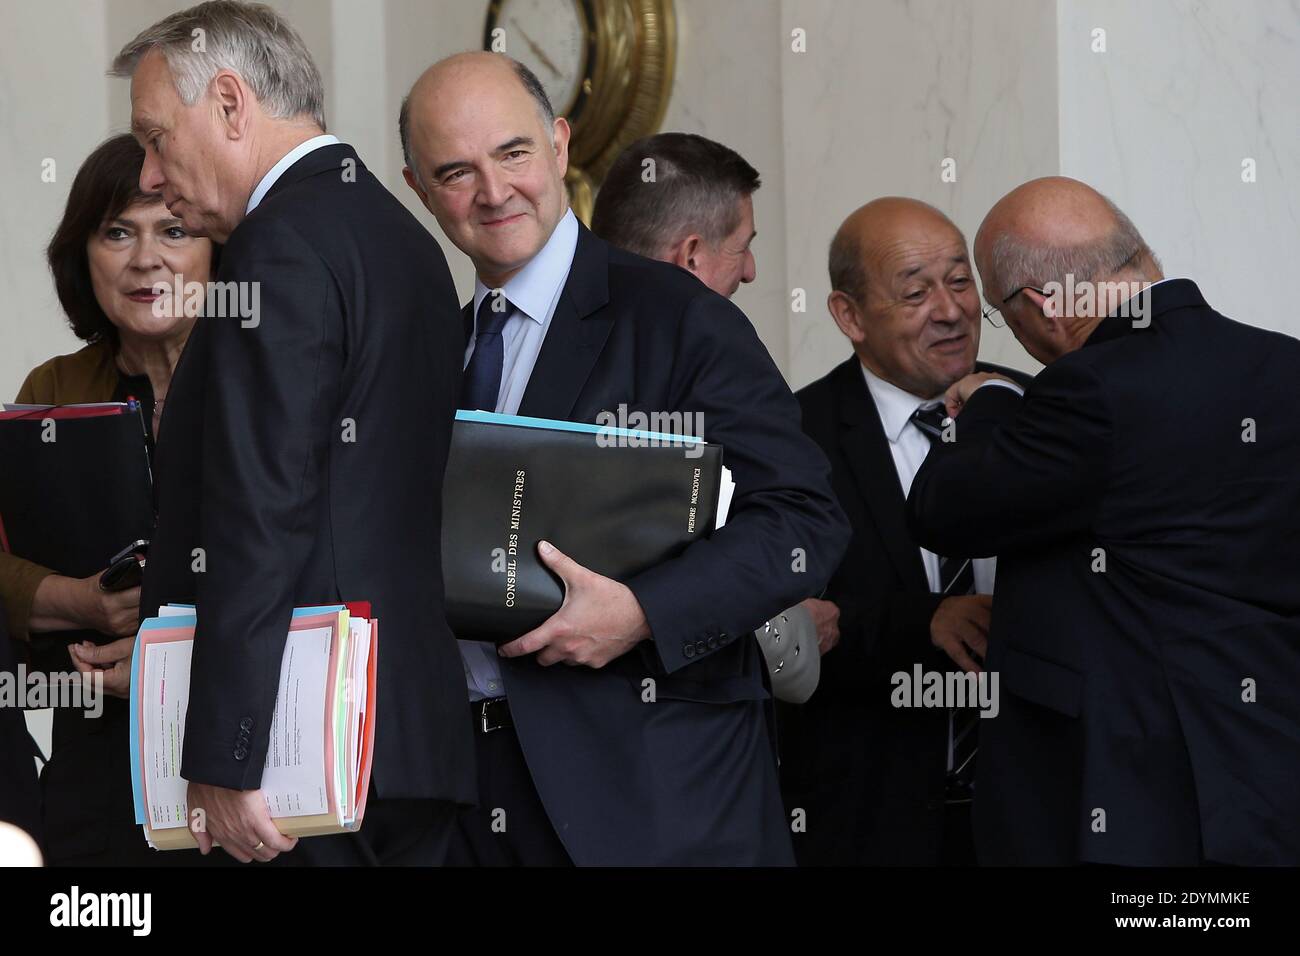 French Junior Minister for Disabled People Marie-Arlette Carlotti, French Prime minister, Jean-Marc Ayrault, French Finance Minister Pierre Moscovici, French Defence Minister Jean-Yves Le Drian and Labour, Employment and Social Dialogue Minister Michel Sapin leave the Elysee presidential Palace after the weekly cabinet meeting, in Paris, France, on June 19, 2013. Photo by Stephane Lemouton/ABACAPRESS.COM Stock Photo